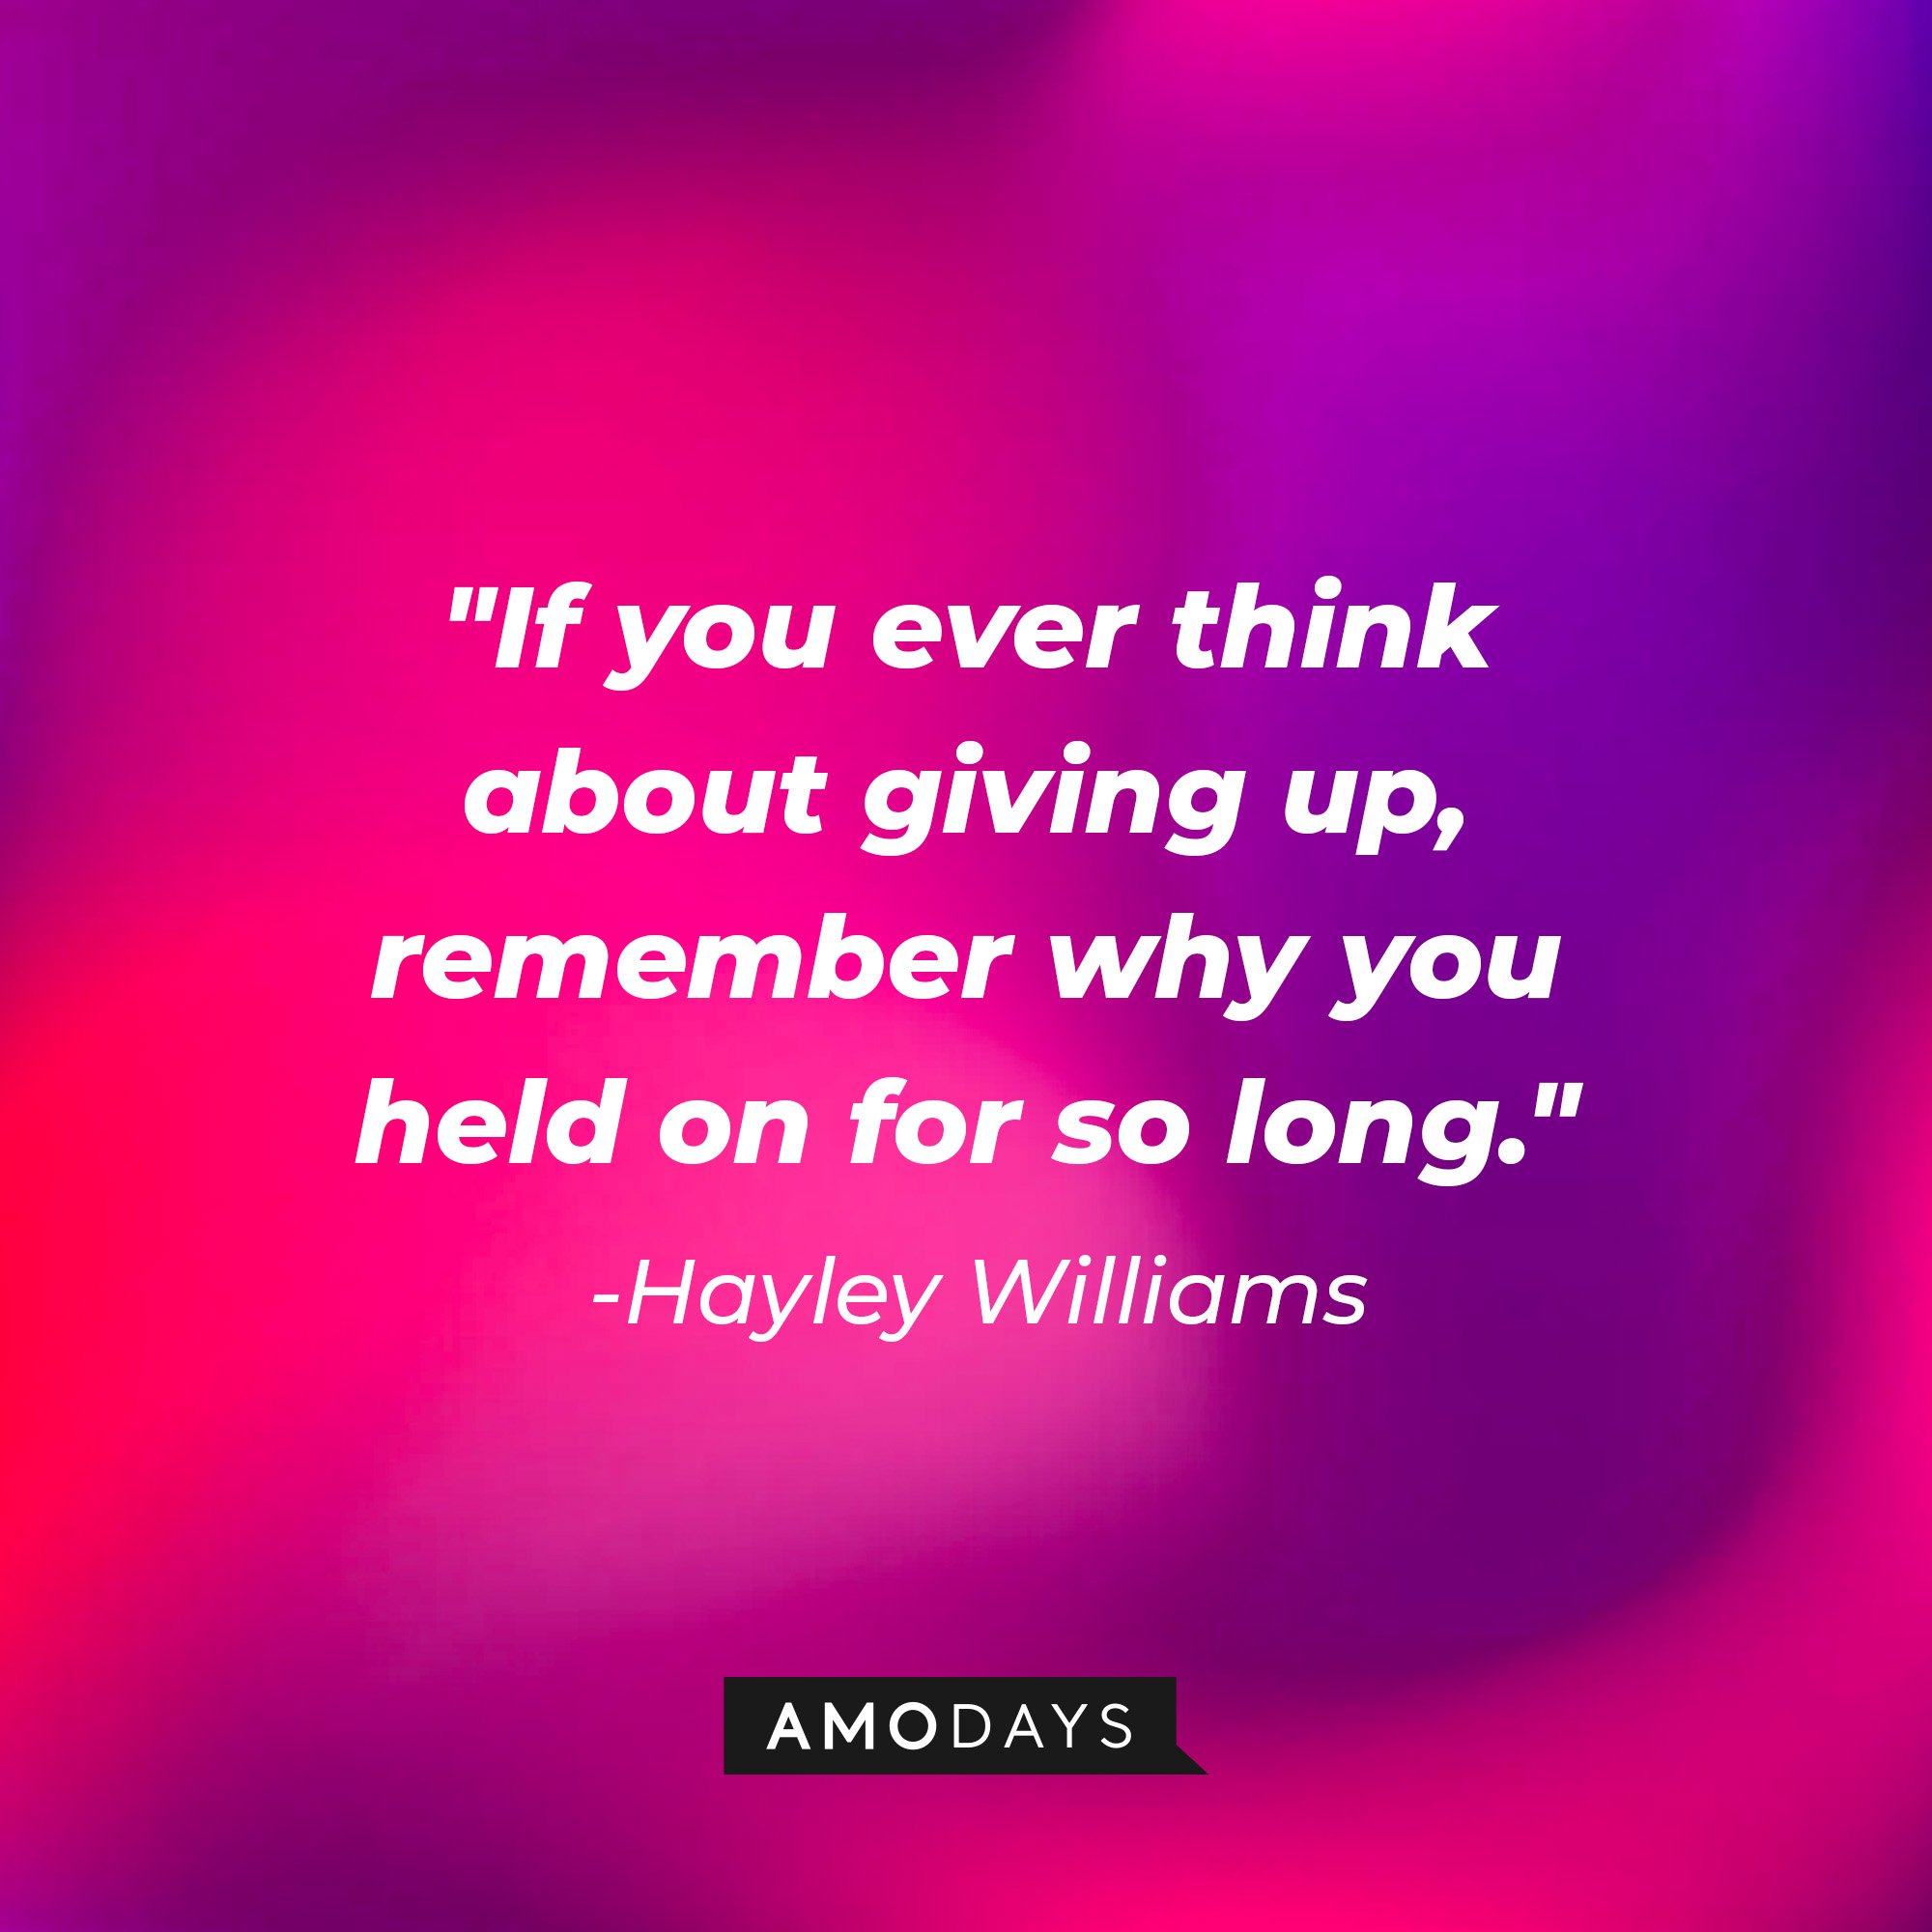 Hayley Williams' quote: "If you ever think about giving up, remember why you held on for so long." | Image: AmoDays